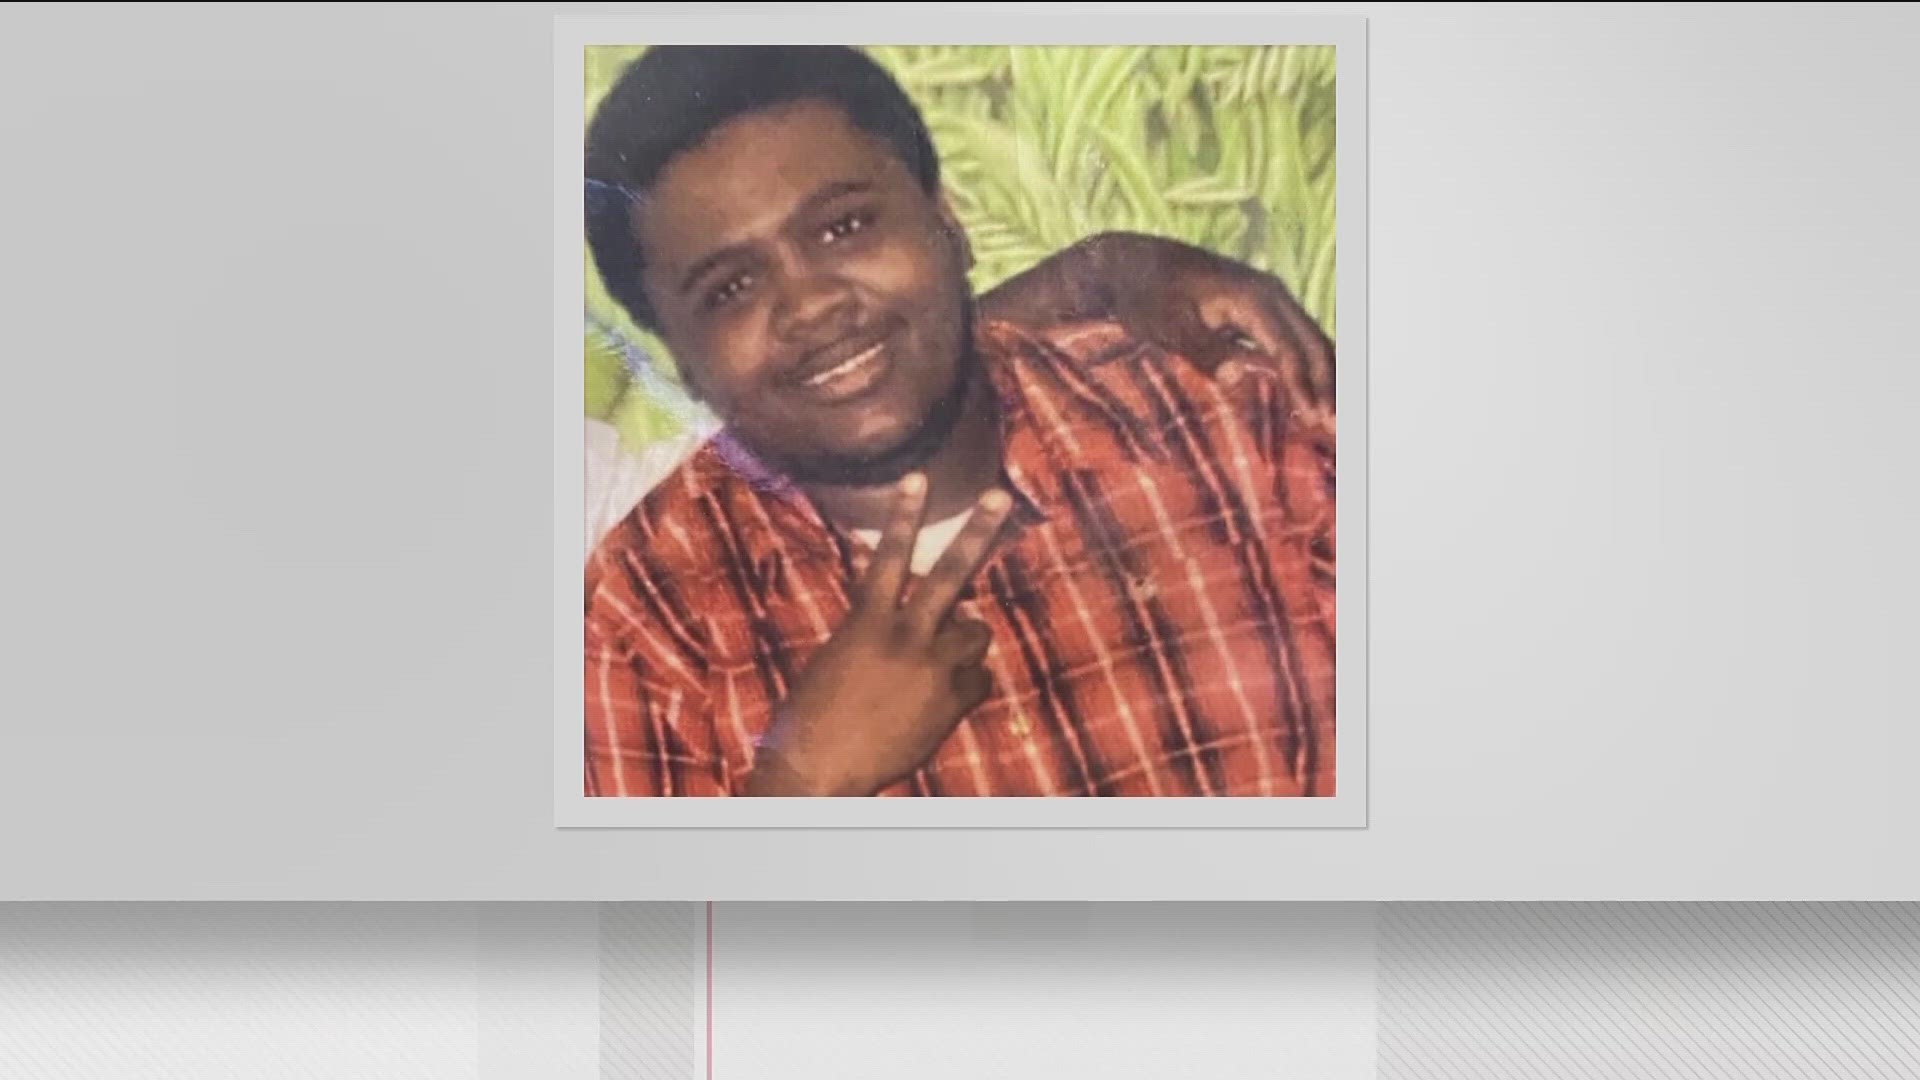 Thompson died last September in the Fulton County Jail. He was found covered in sores and bites from bed bugs and lice.